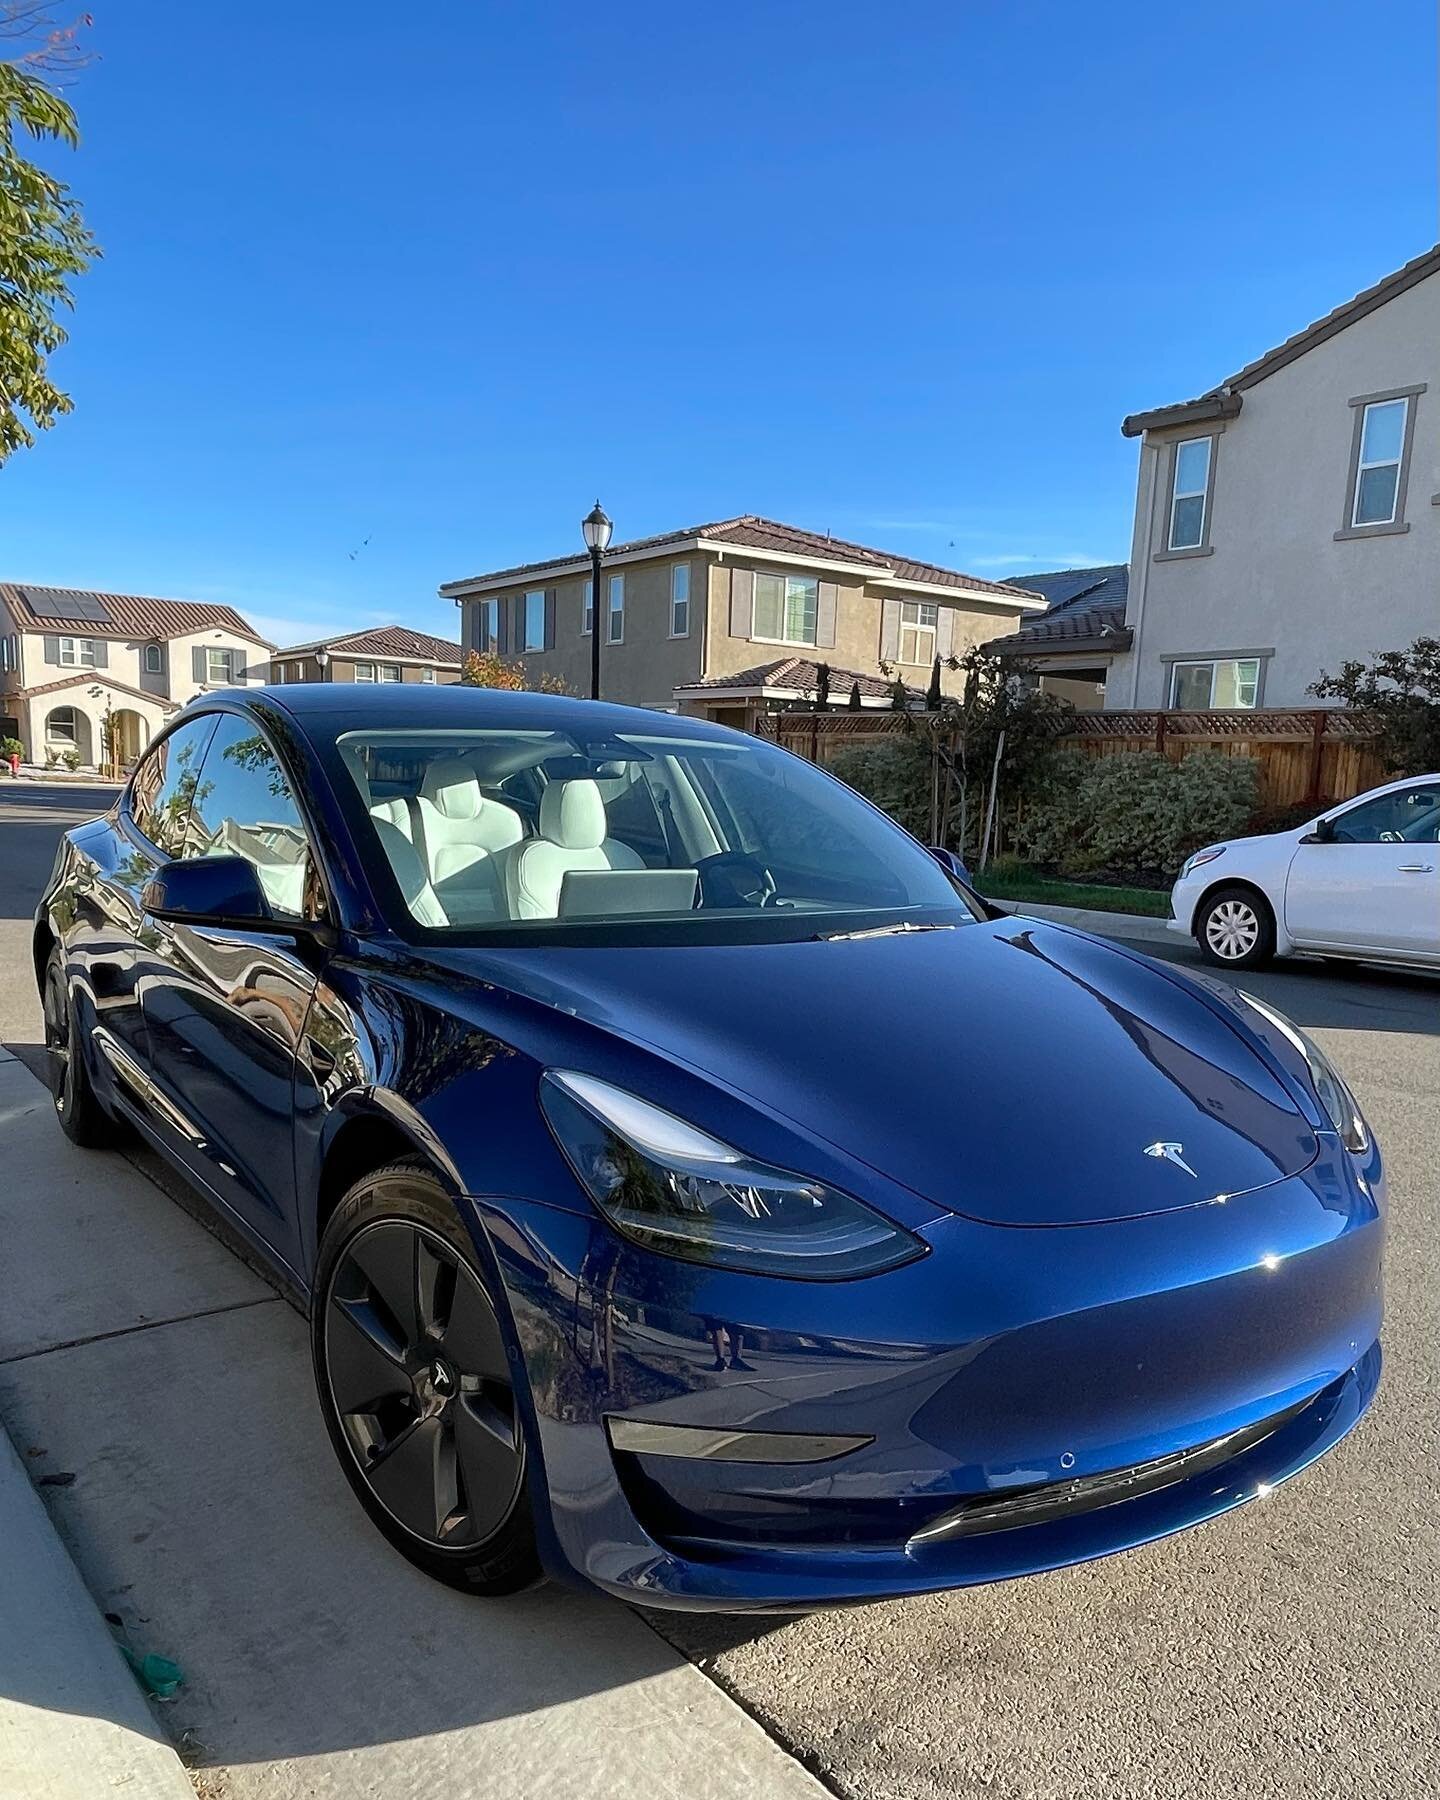 Tesla Model 3 in for a Full Front PPF &amp; Ceramic Coating! We first performed a multi step paint correction as well to ensure near perfection of the paint before sealing it with the film &amp; @adamspolished 7-9 Year Graphene Coating. Glass &amp; t